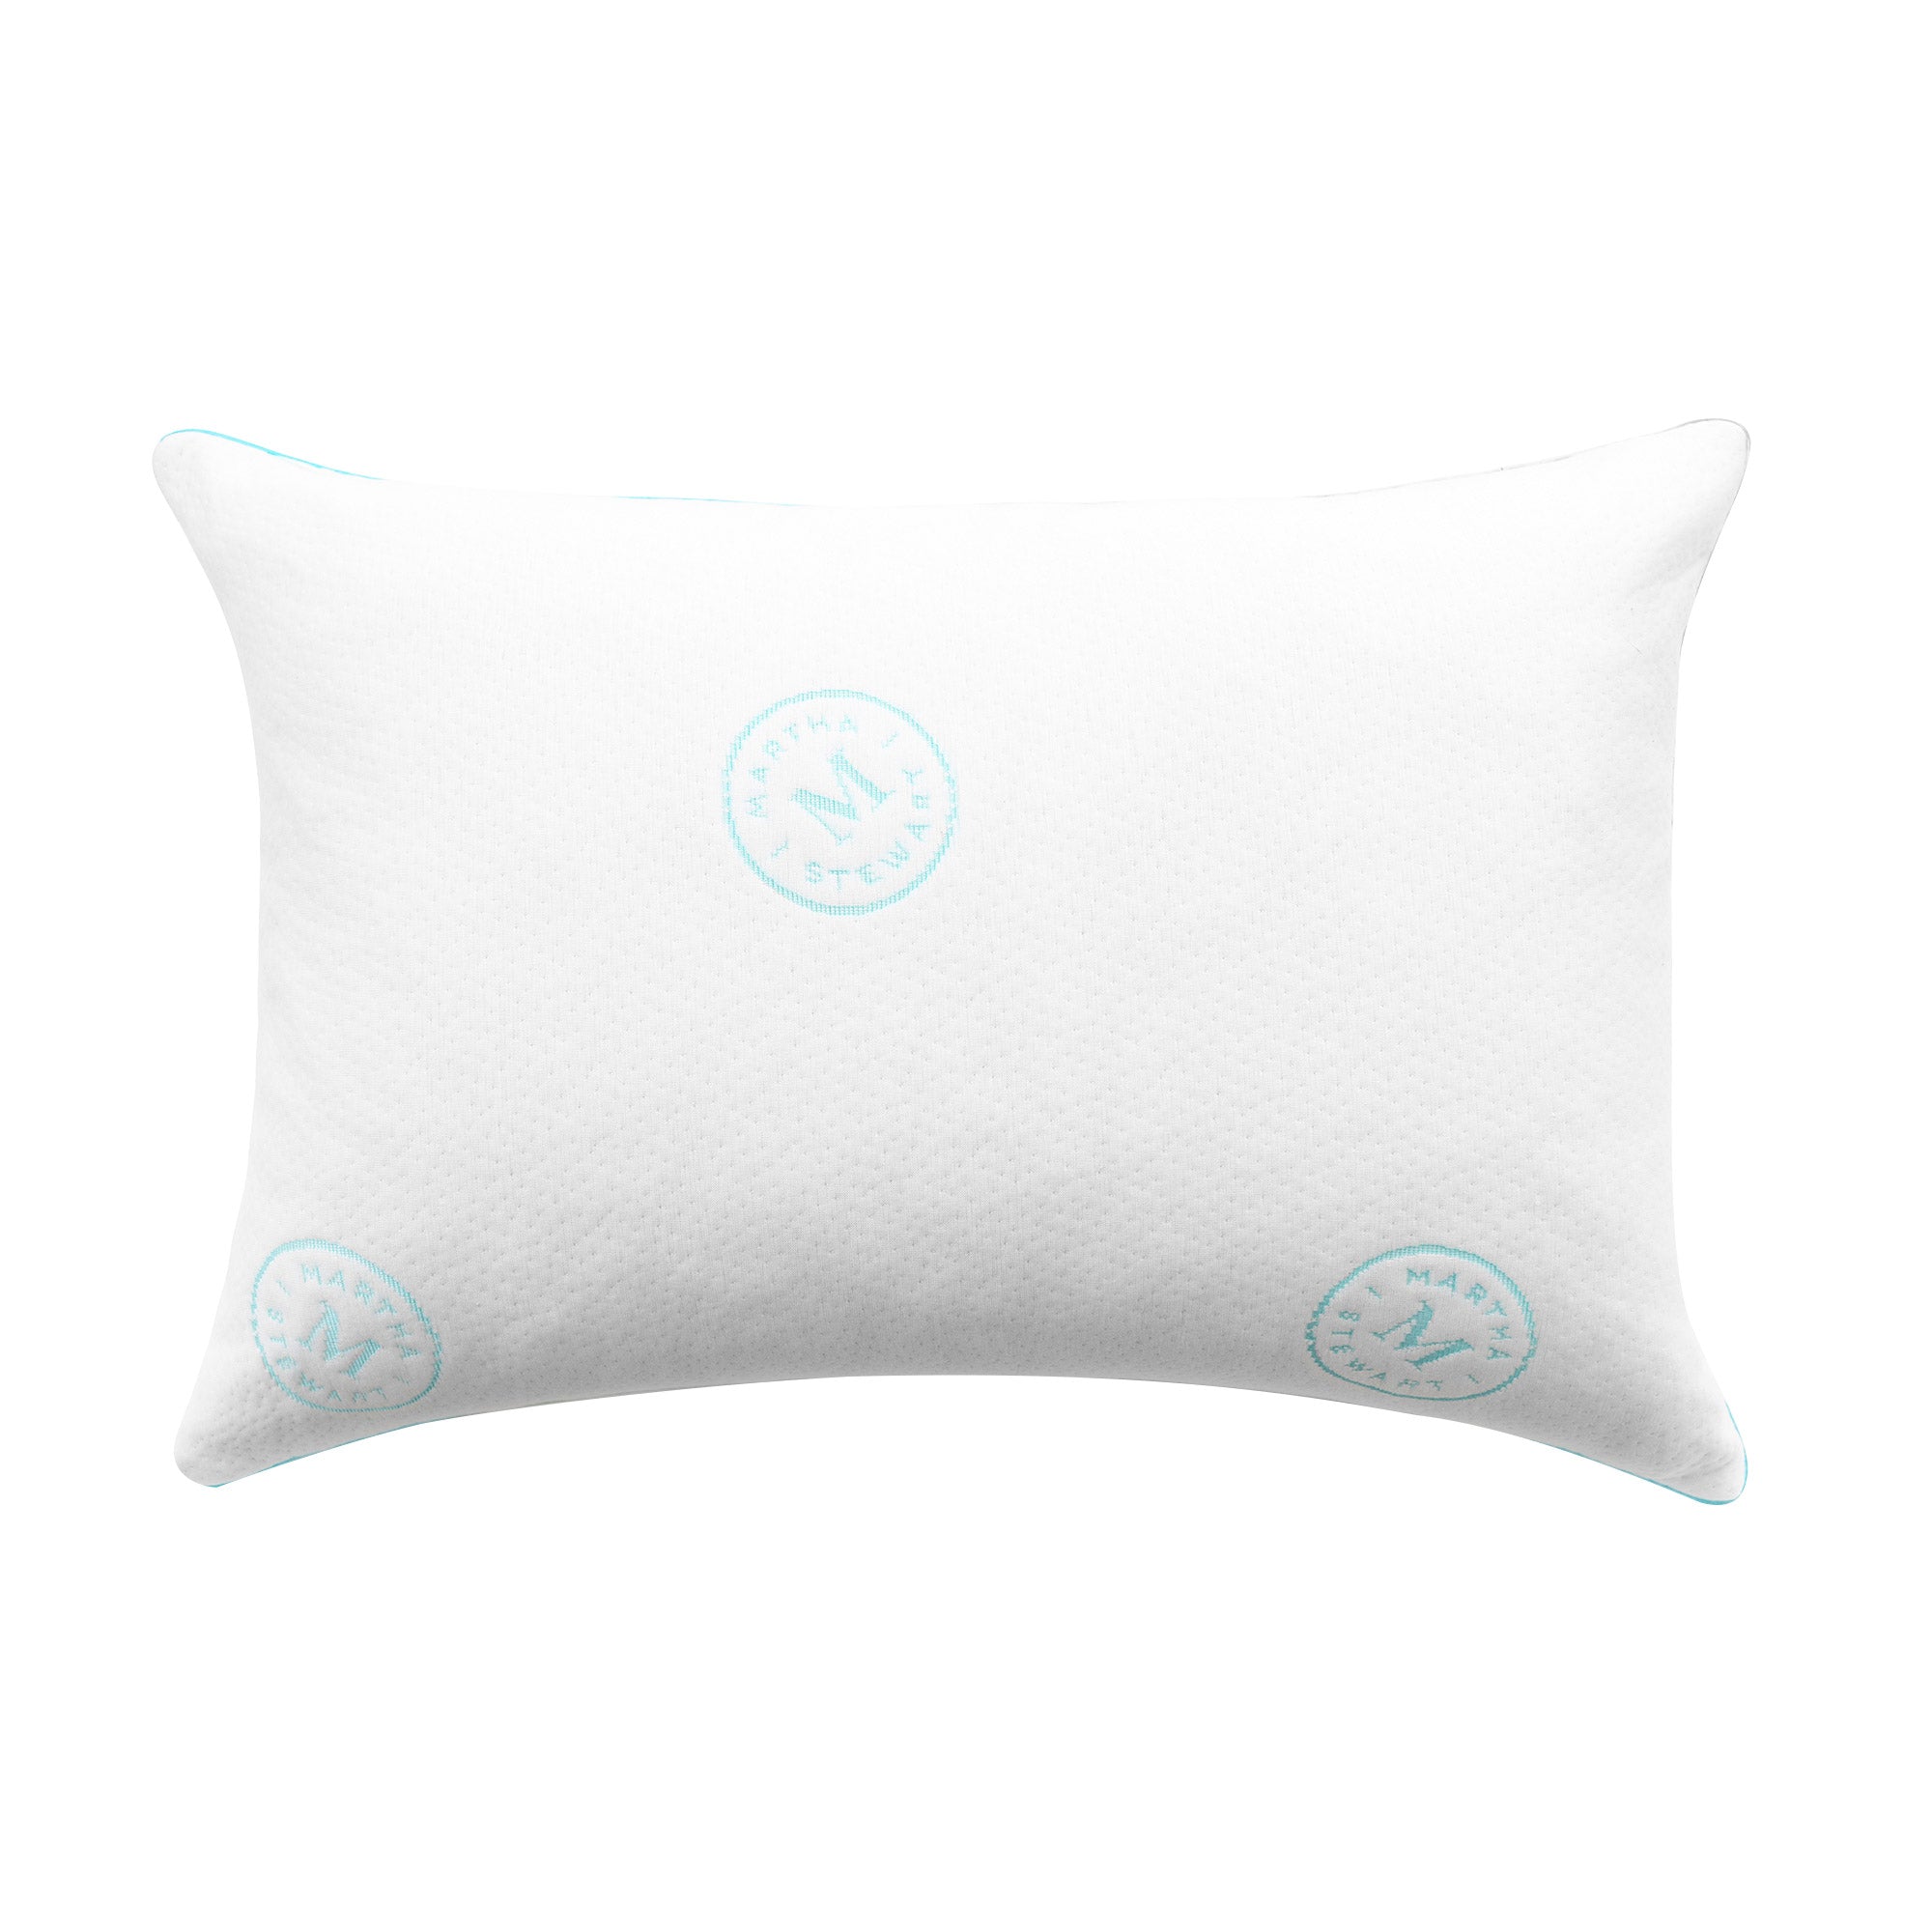 Signature Cooling Knit Memory Foam Cluster 2-Pack Pillows